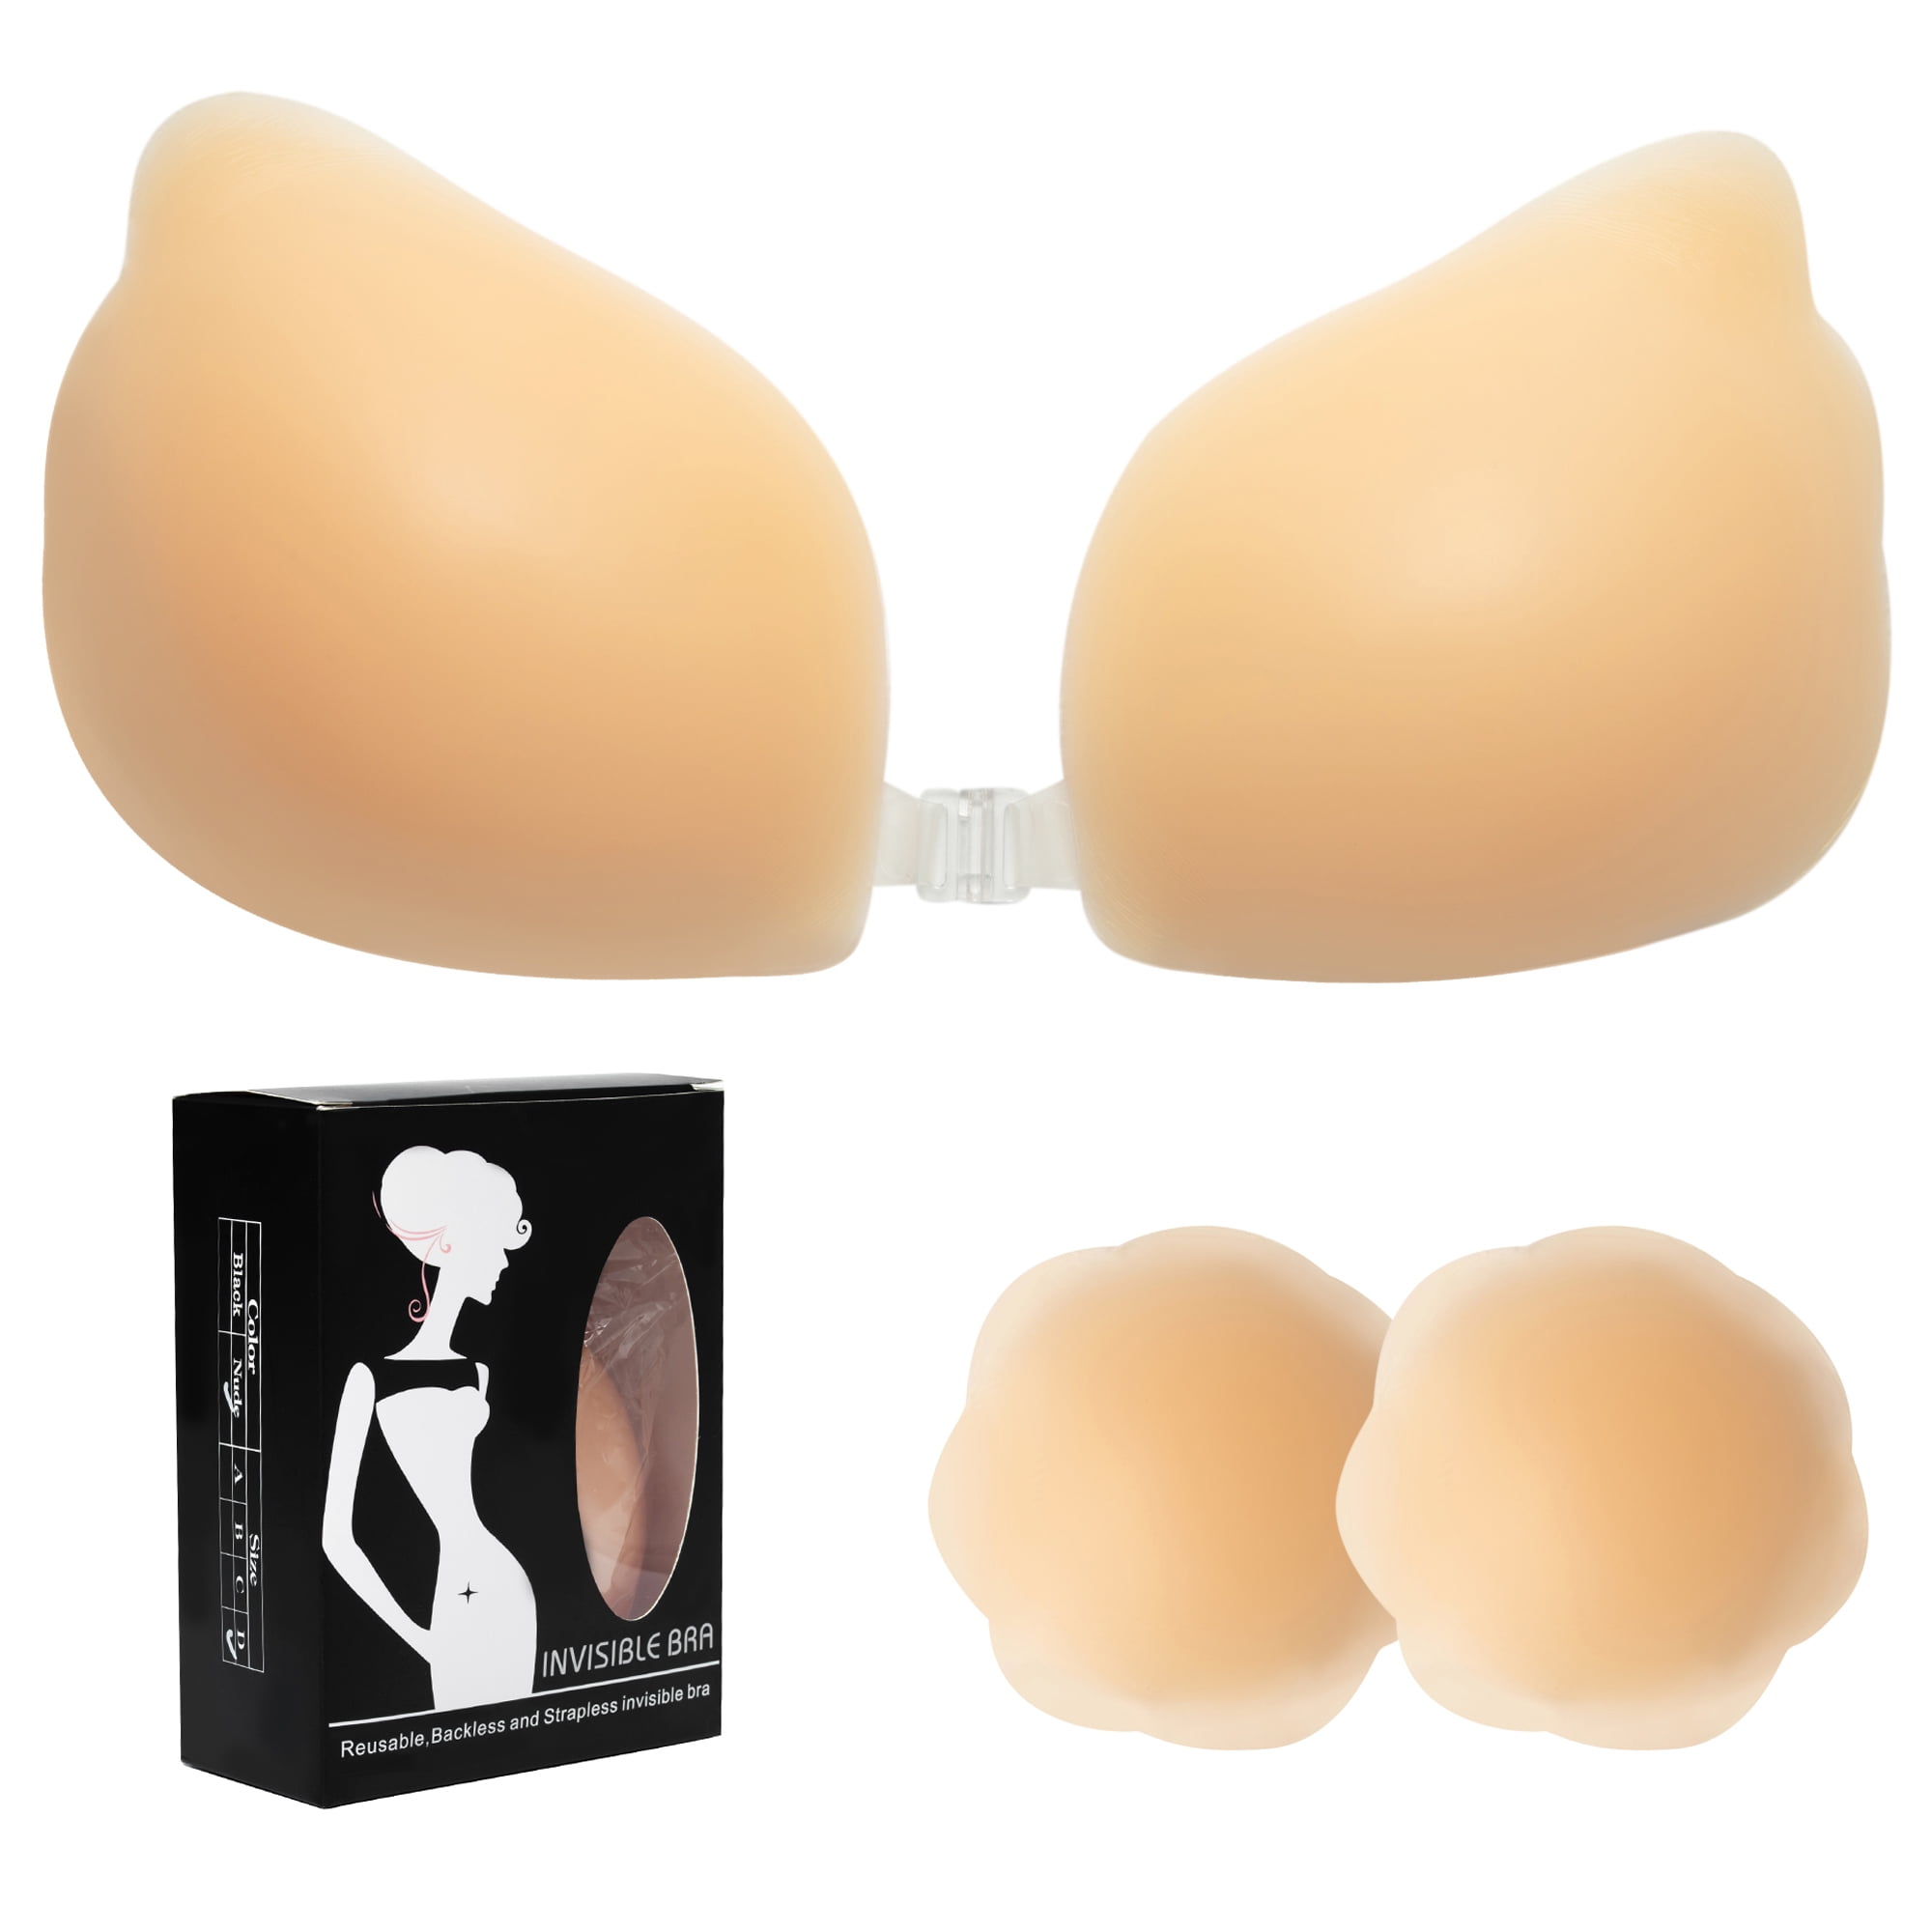 Adhesive Bra Strapless Sticky Silicone Bra Push Up Invisible Reusable  Backless Bra For Women-i